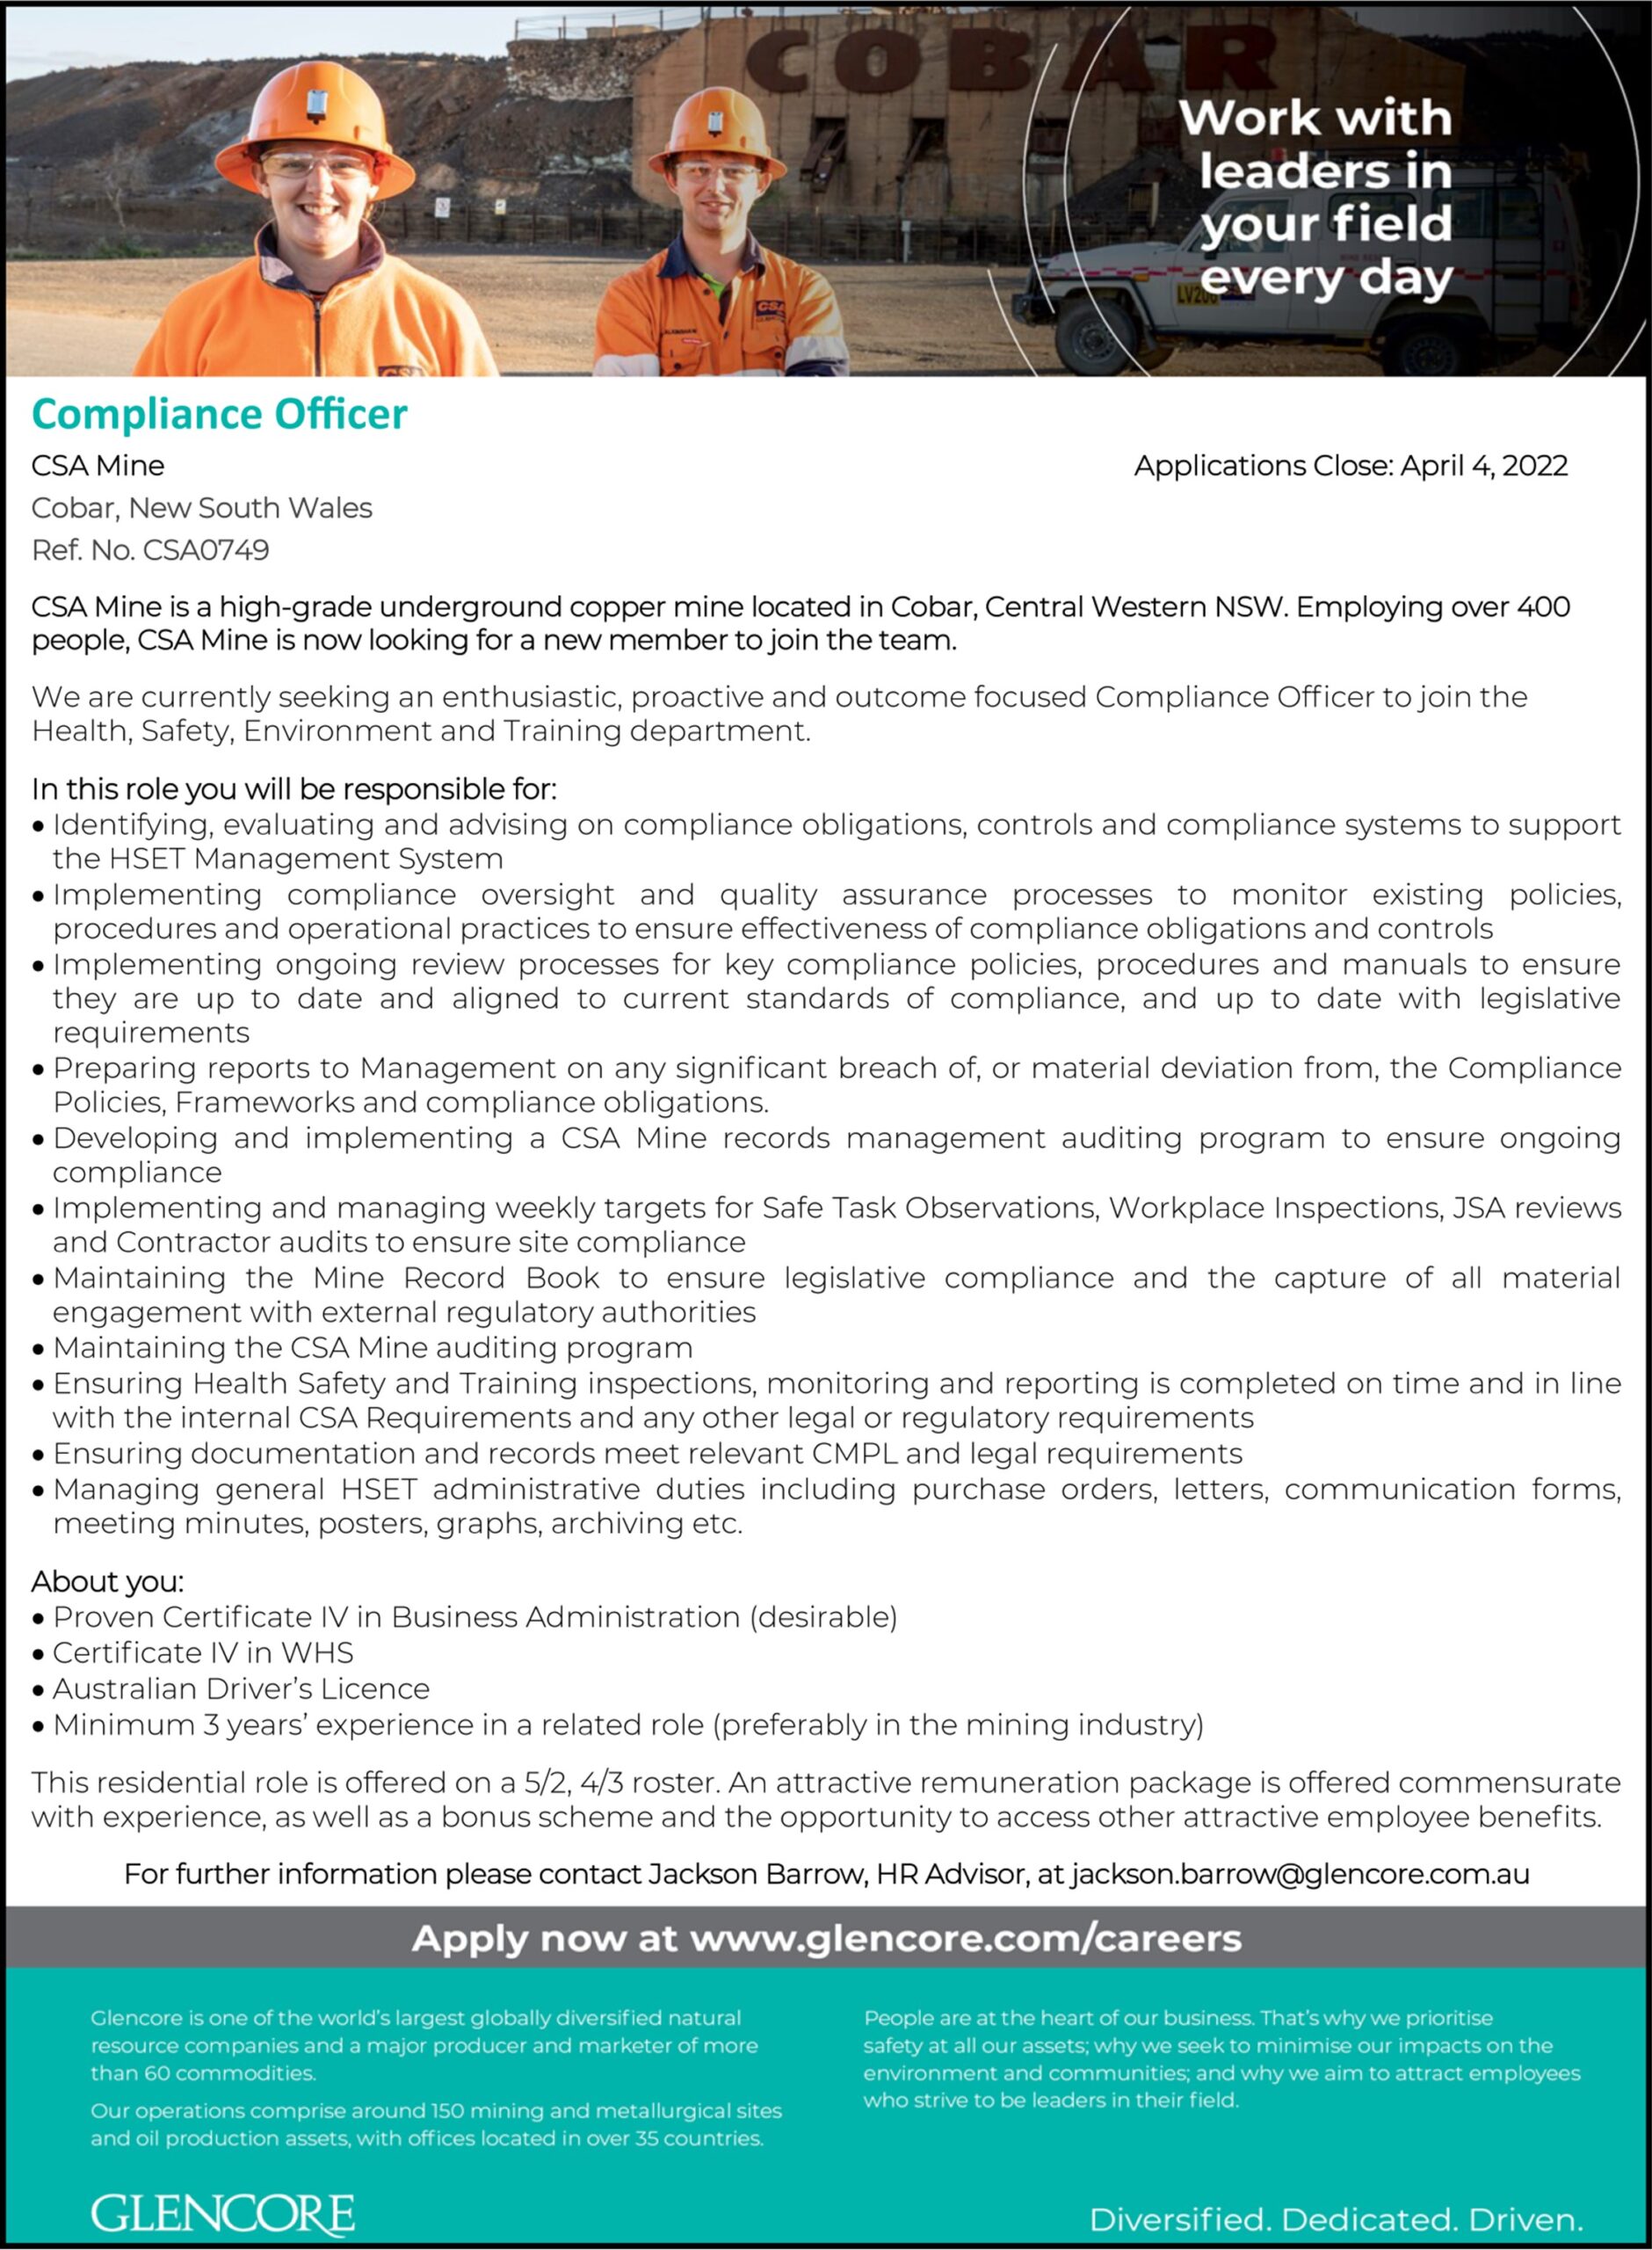 Compliance Officer – CSA Mine (Glencore) – The Cobar Weekly